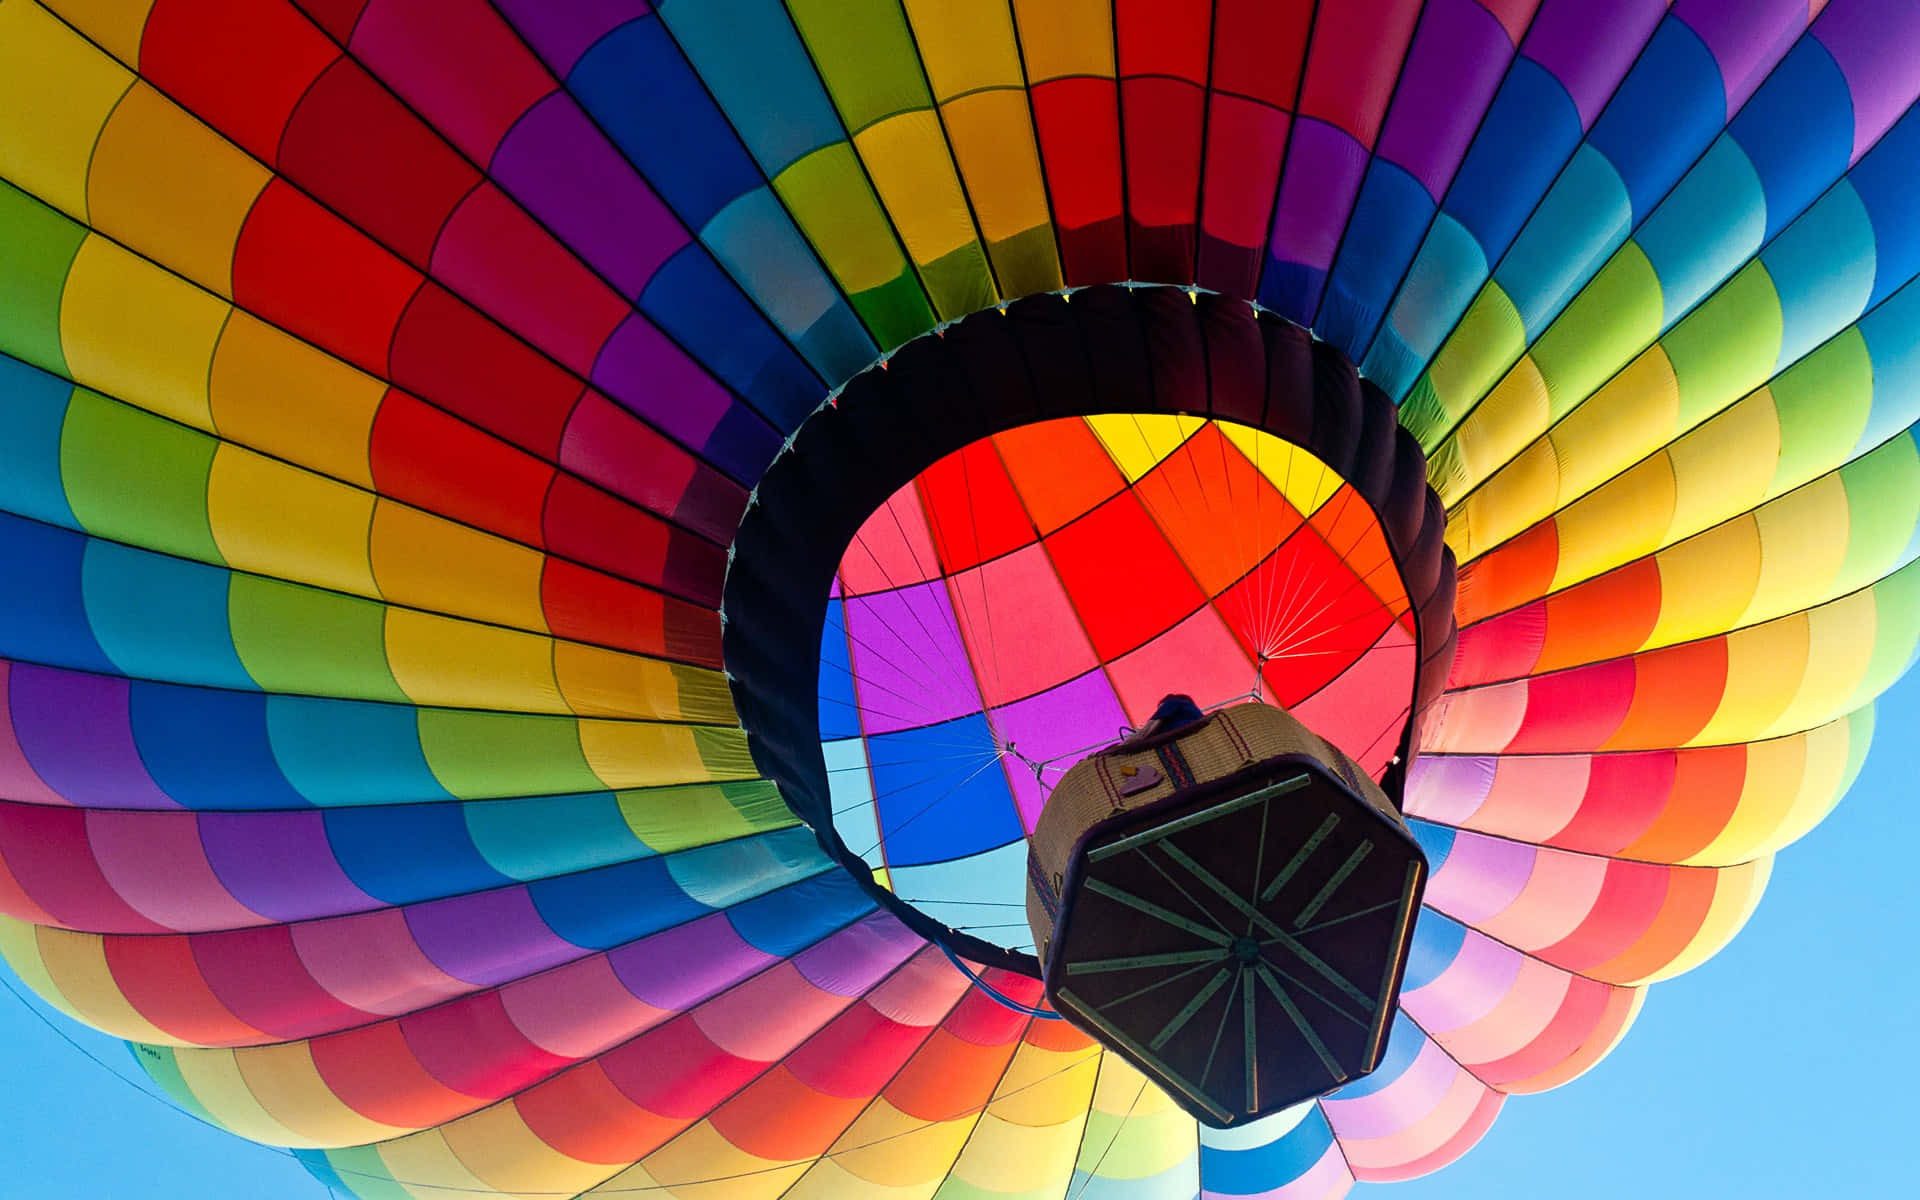 Take Flight into the sunset in a Hot Air Balloon